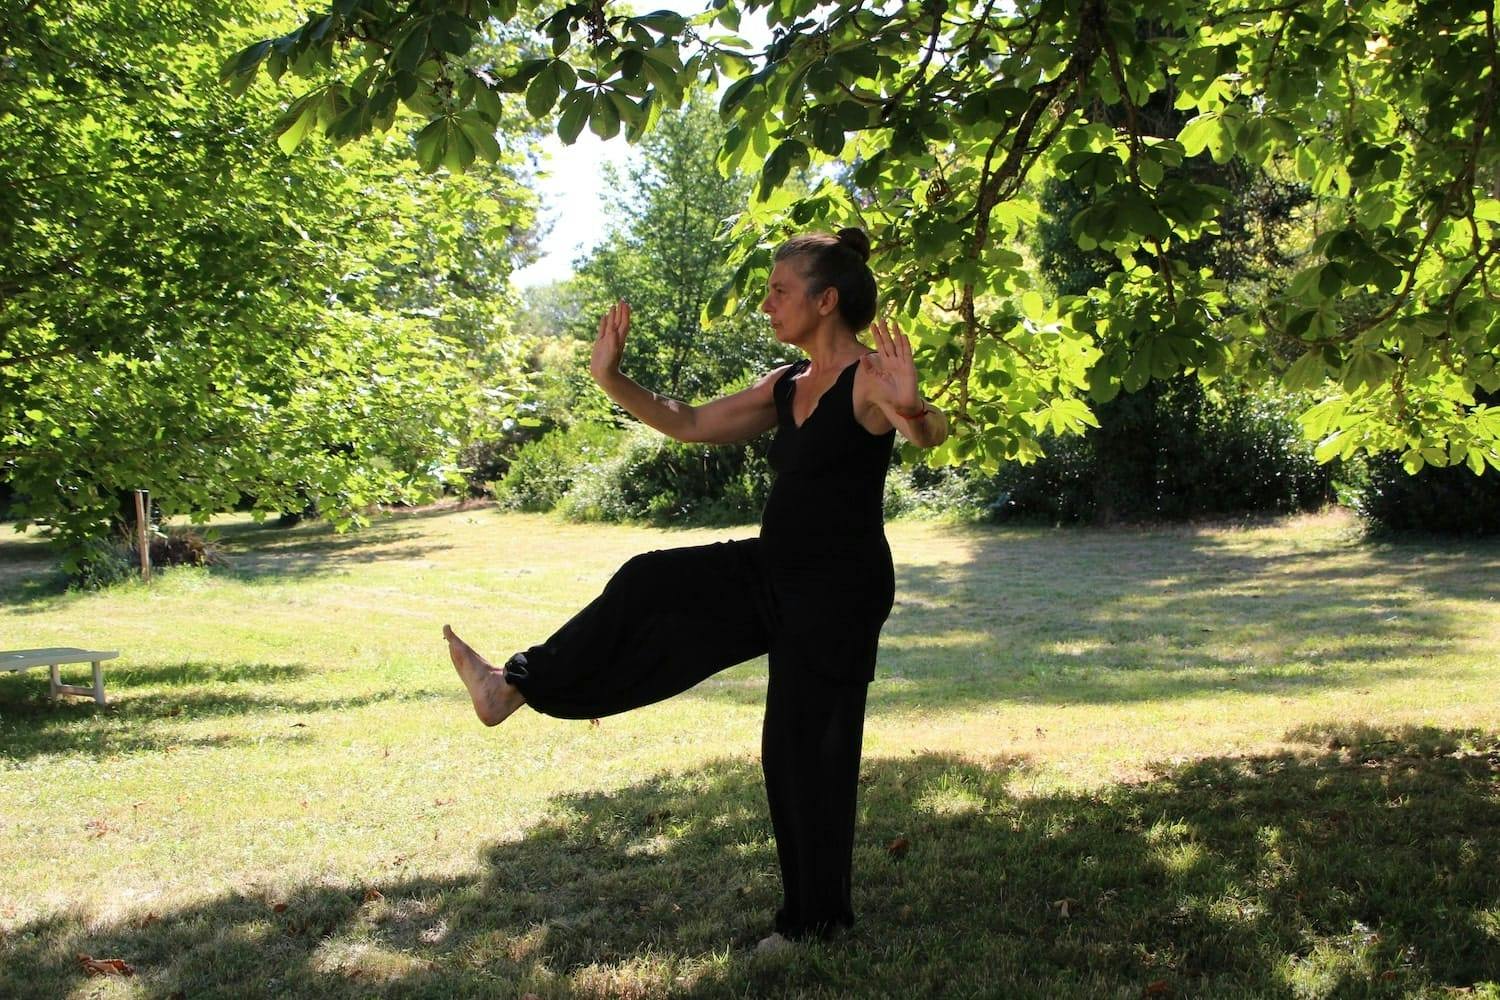 Tai chi, a form of slow-moving martial arts, helps boost memory